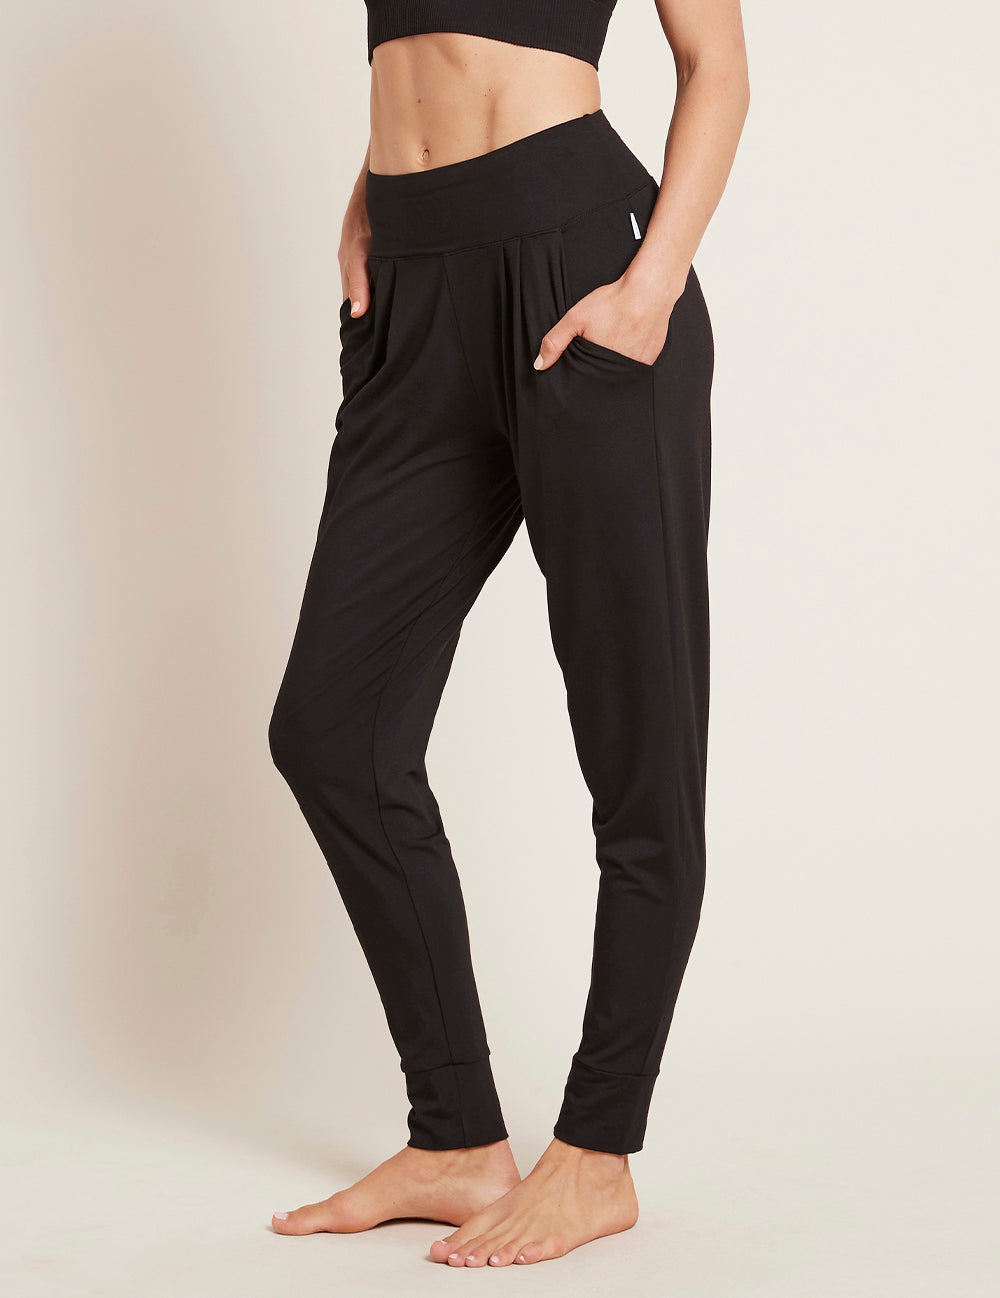 Downtime Lounge Pants | Lounge Pants For Women | Boody